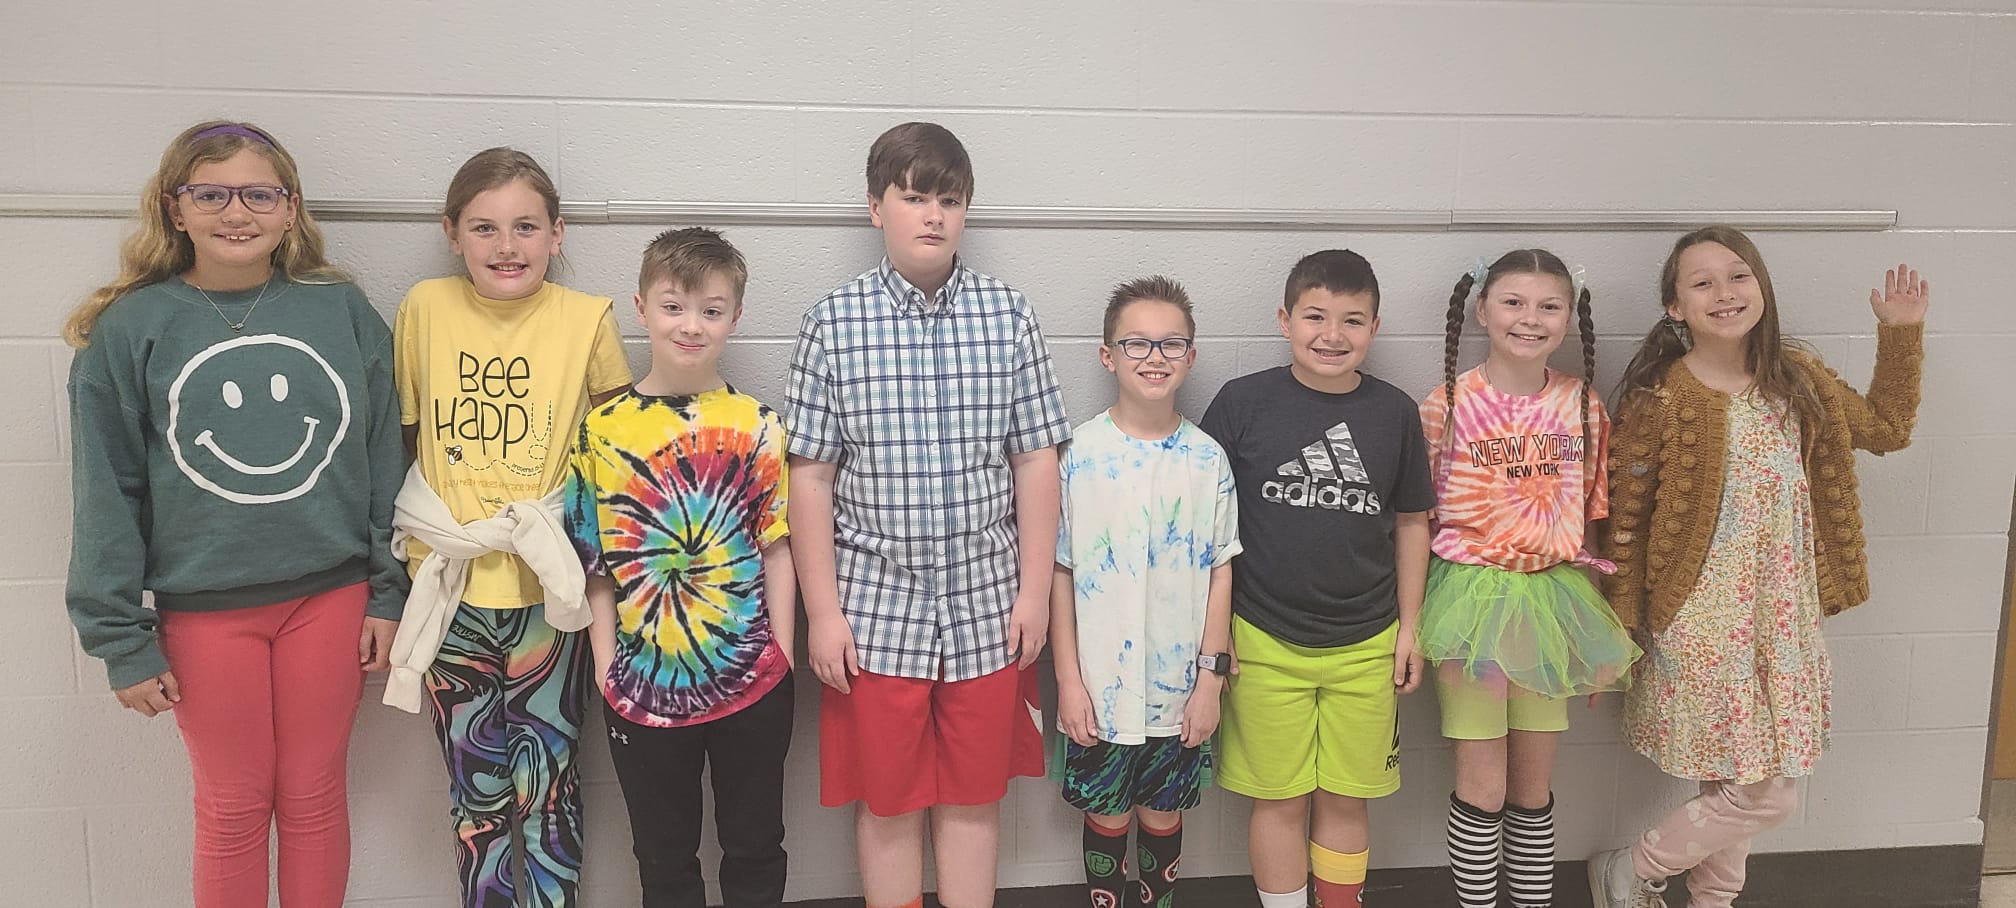 Mixed Up Monday: Students wore wacky and mismatched clothes to celebrate Read Across America Week.